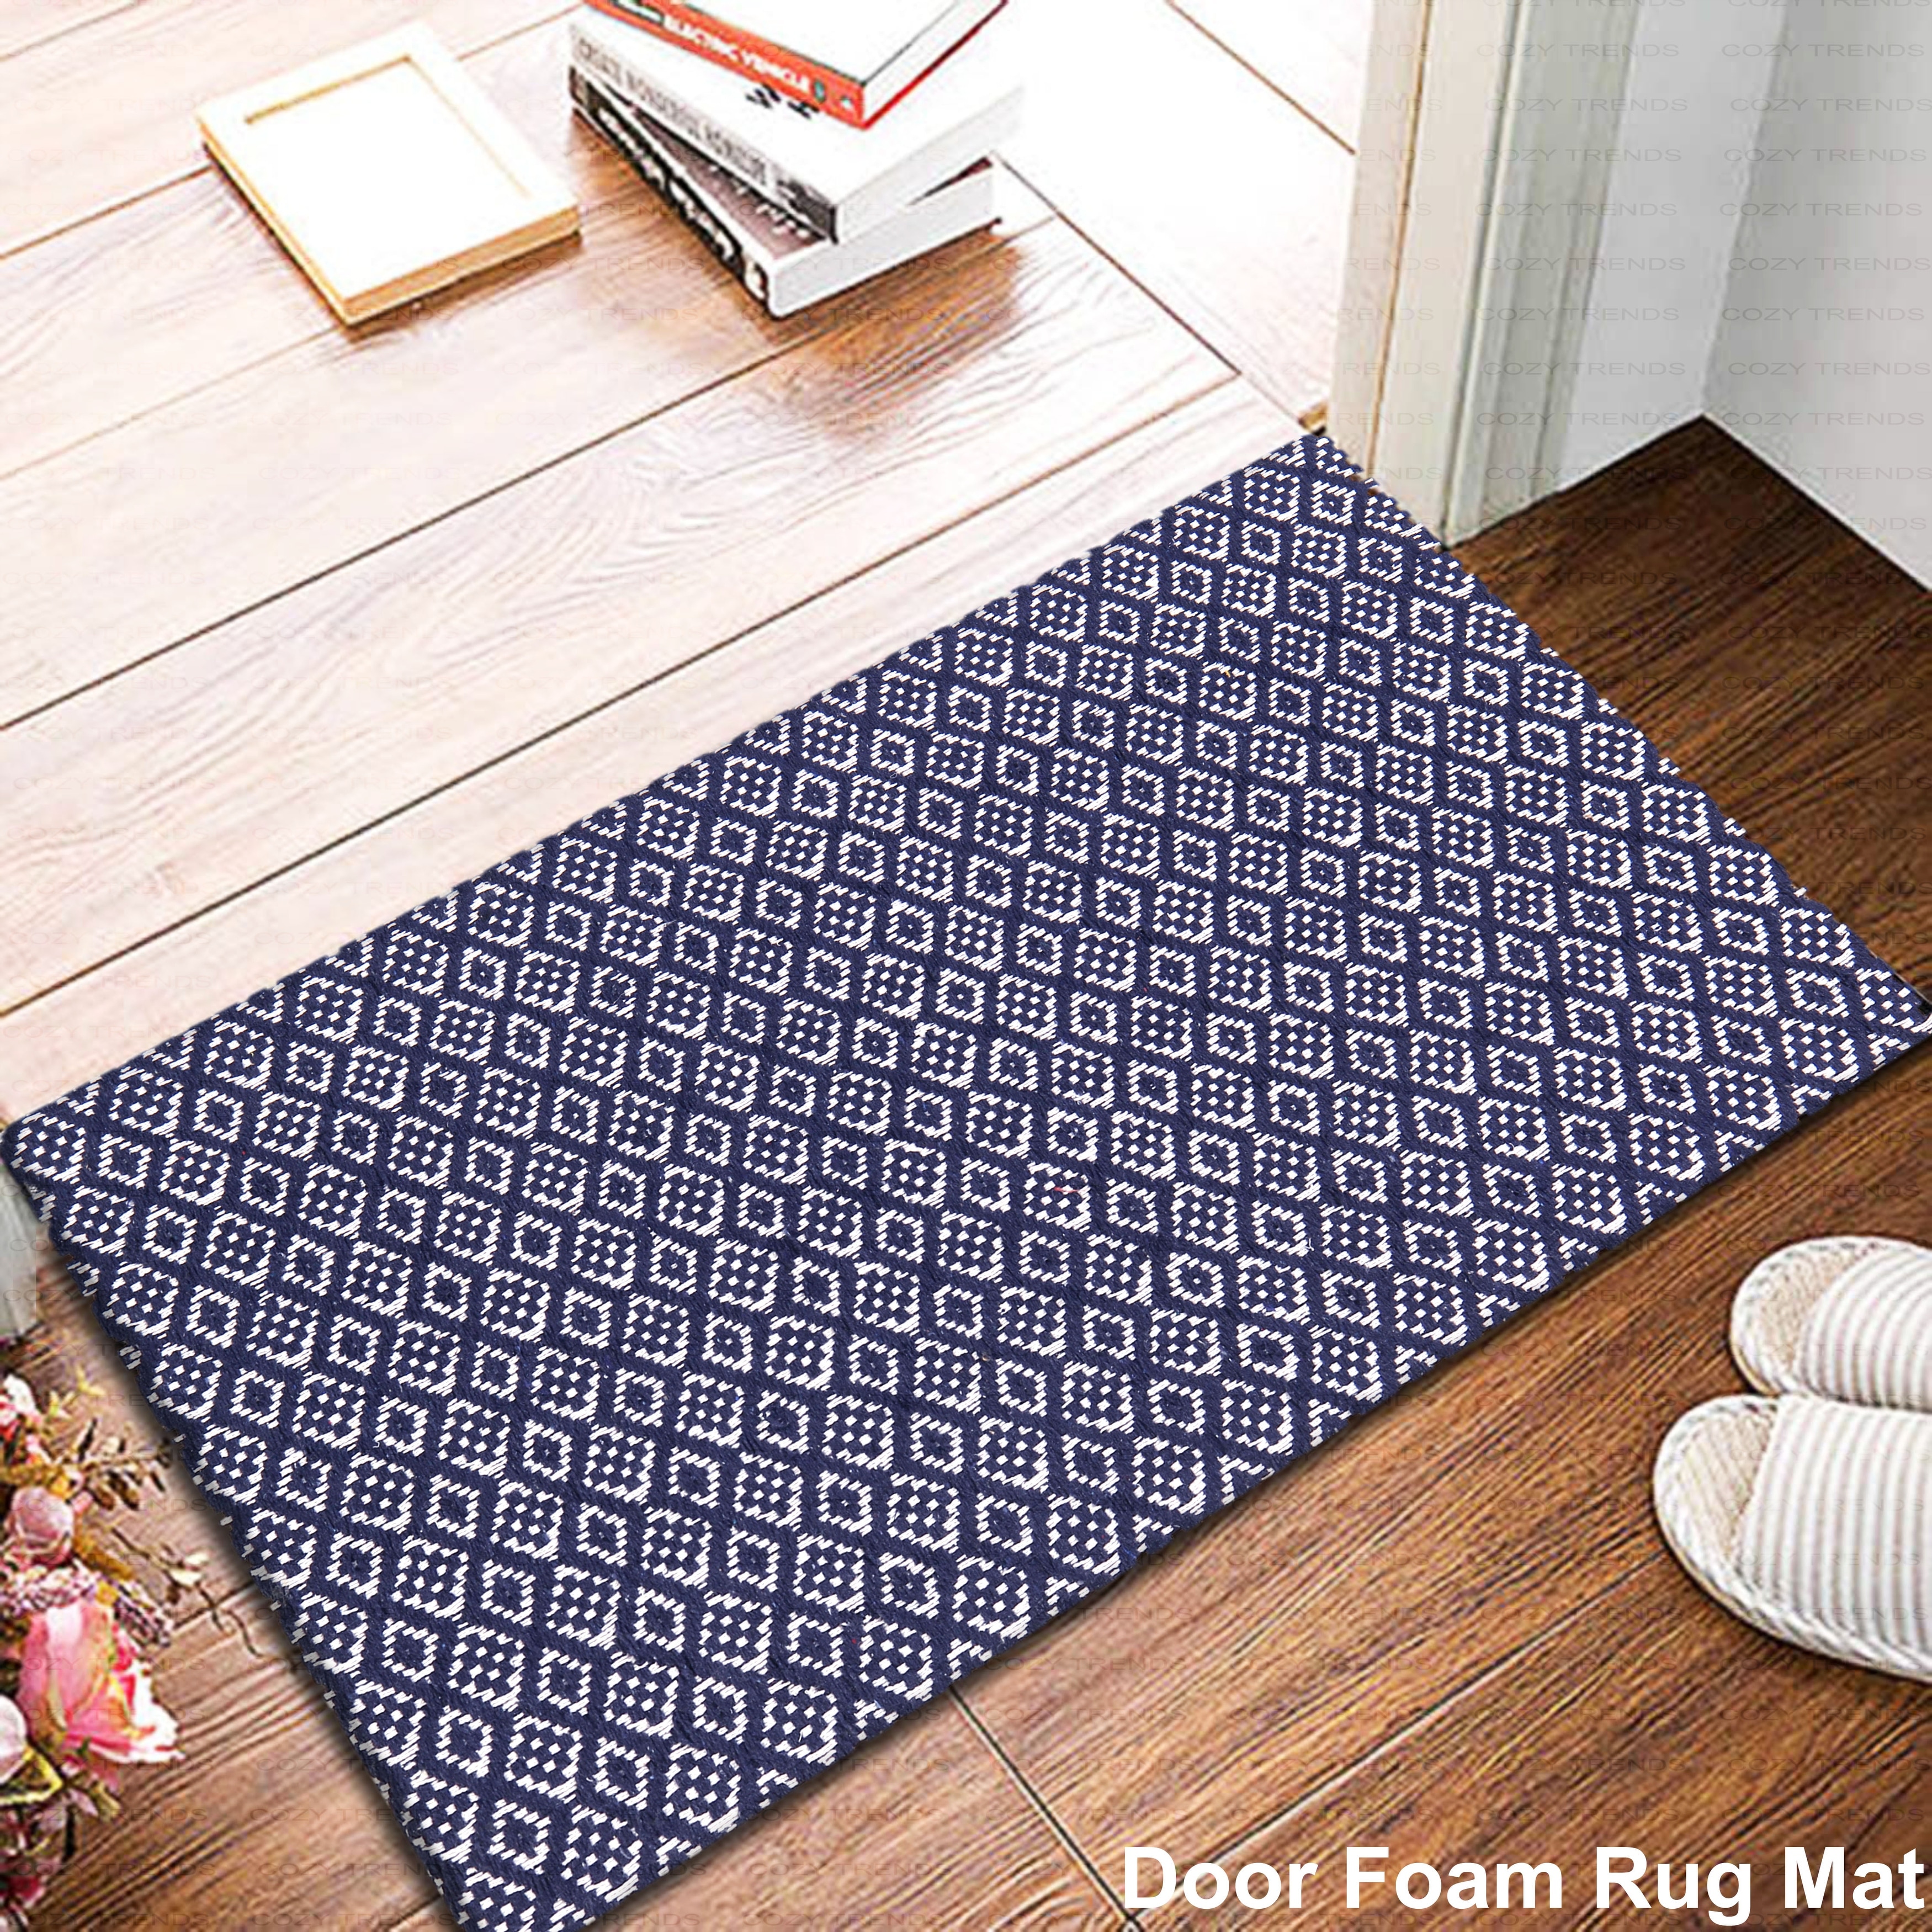 https://ak1.ostkcdn.com/images/products/is/images/direct/e57d5988fd4a3982a155c0989d722e76ff7ab902/Hand-Woven-Kitchen--Doormat-Bathroom-100%25-Cotton-Mat-18%22-x-30%22-With-Foam-Backing.jpg